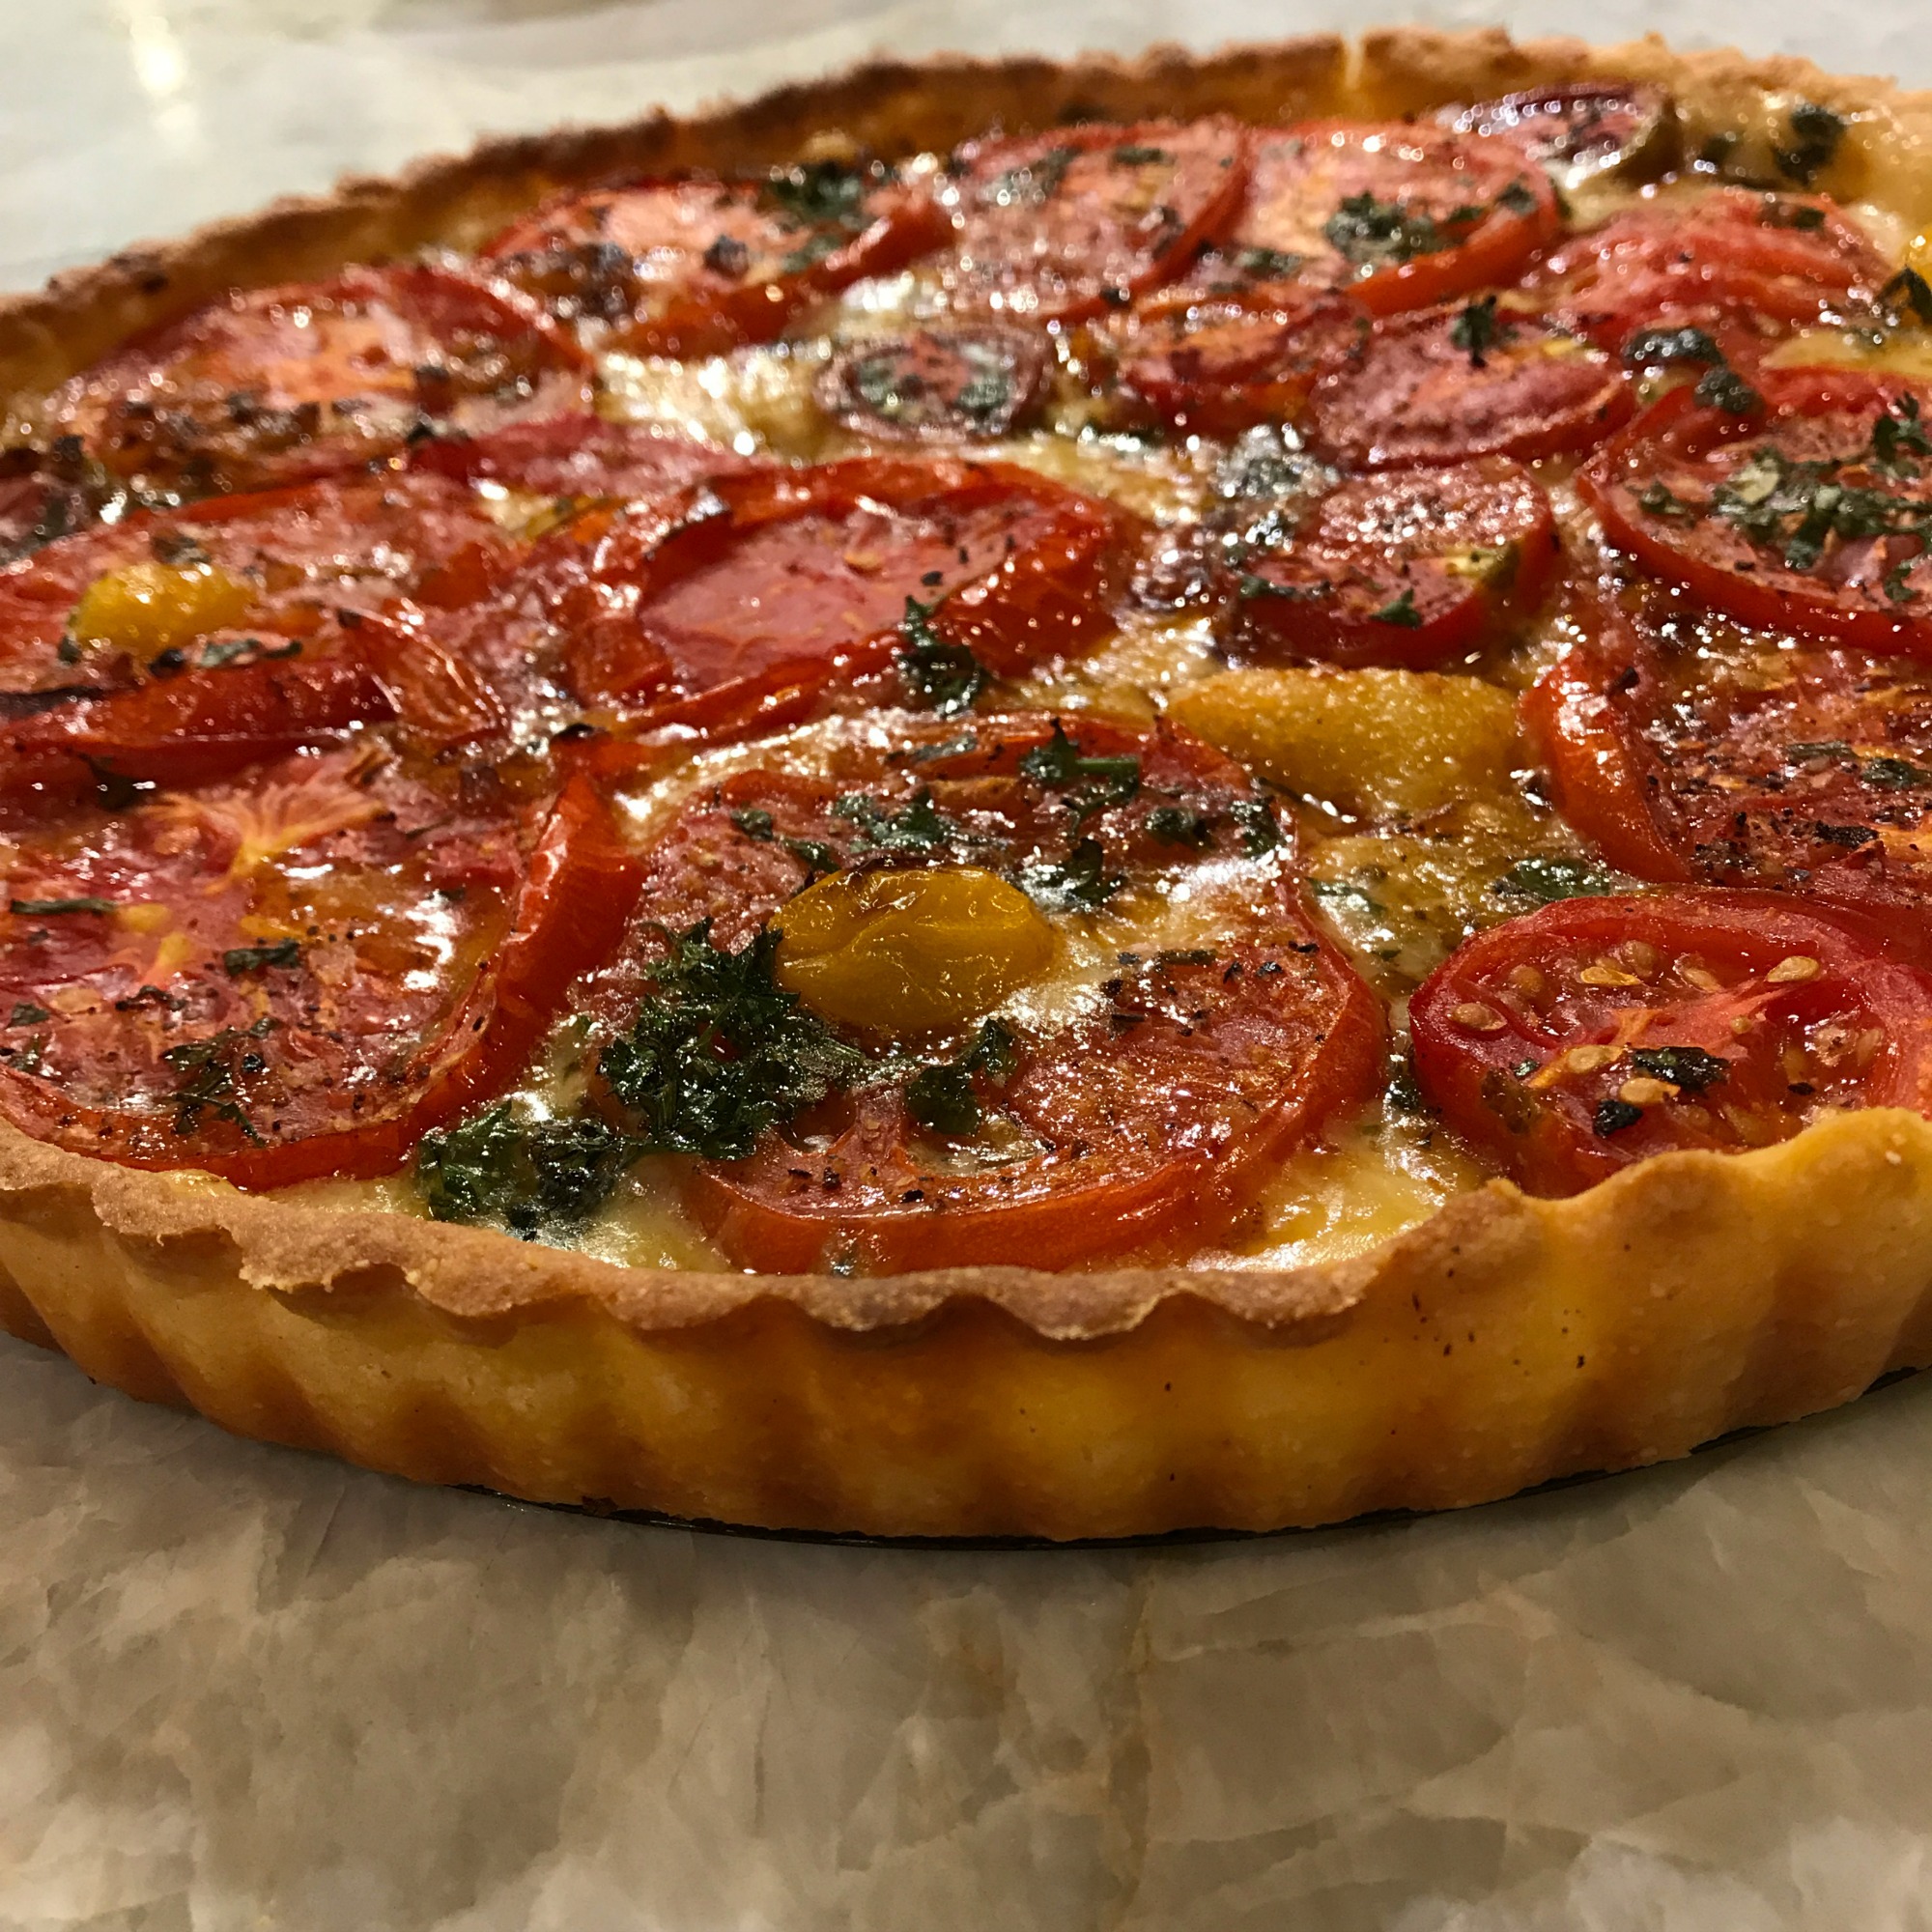 French Heirloom Tomato and Cheese Tart with Fresh Herbs